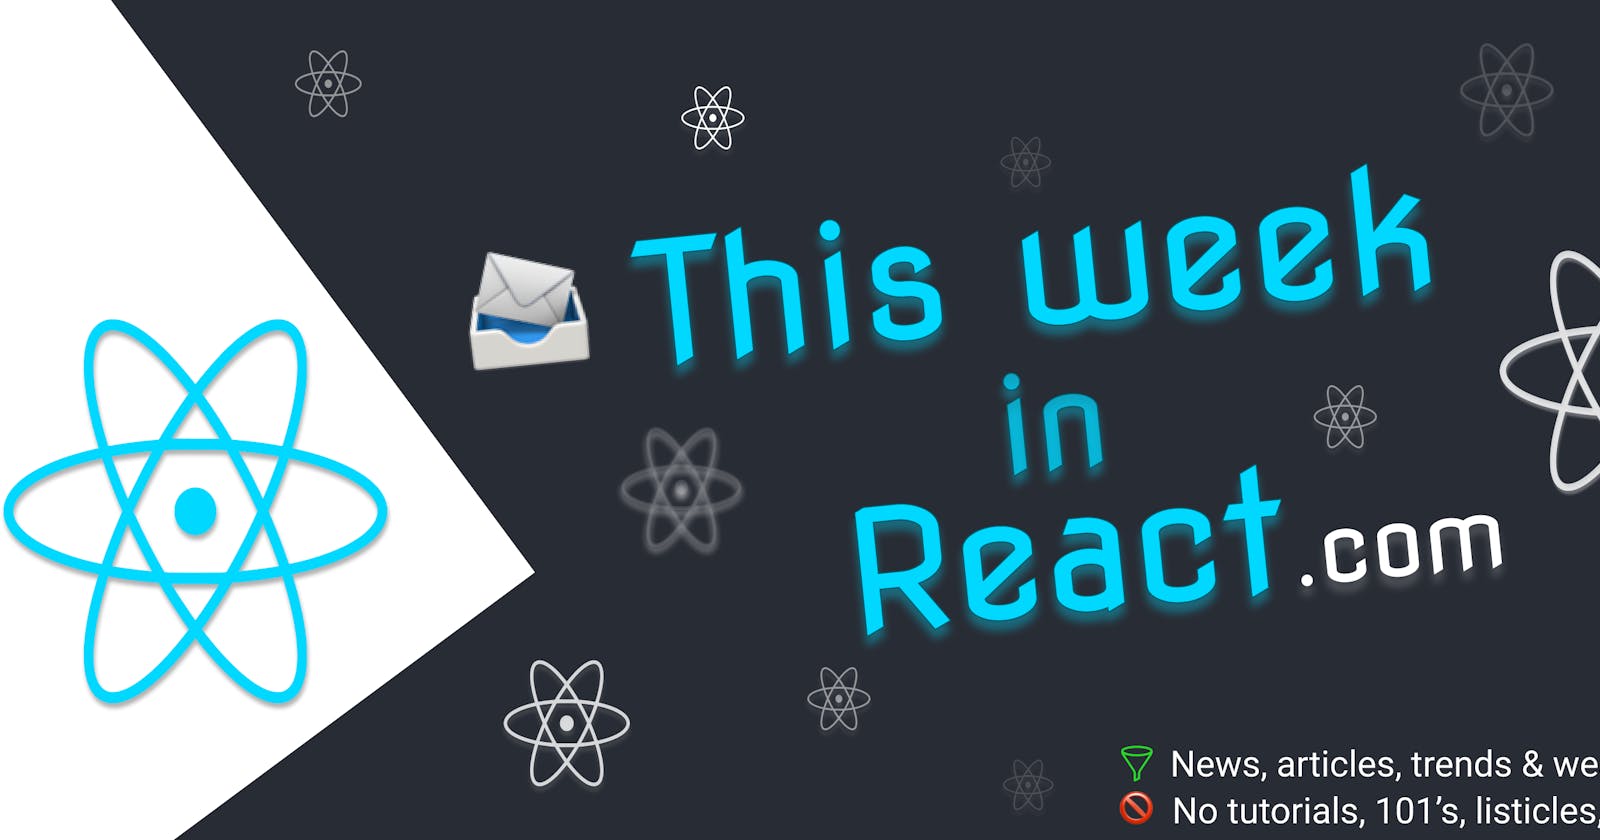 This Week In React #117: React criticism, useEvent, Next.js, Remix, Gatsby, Expo, Storybook, Ignite, React-Native, TS, Qwik...